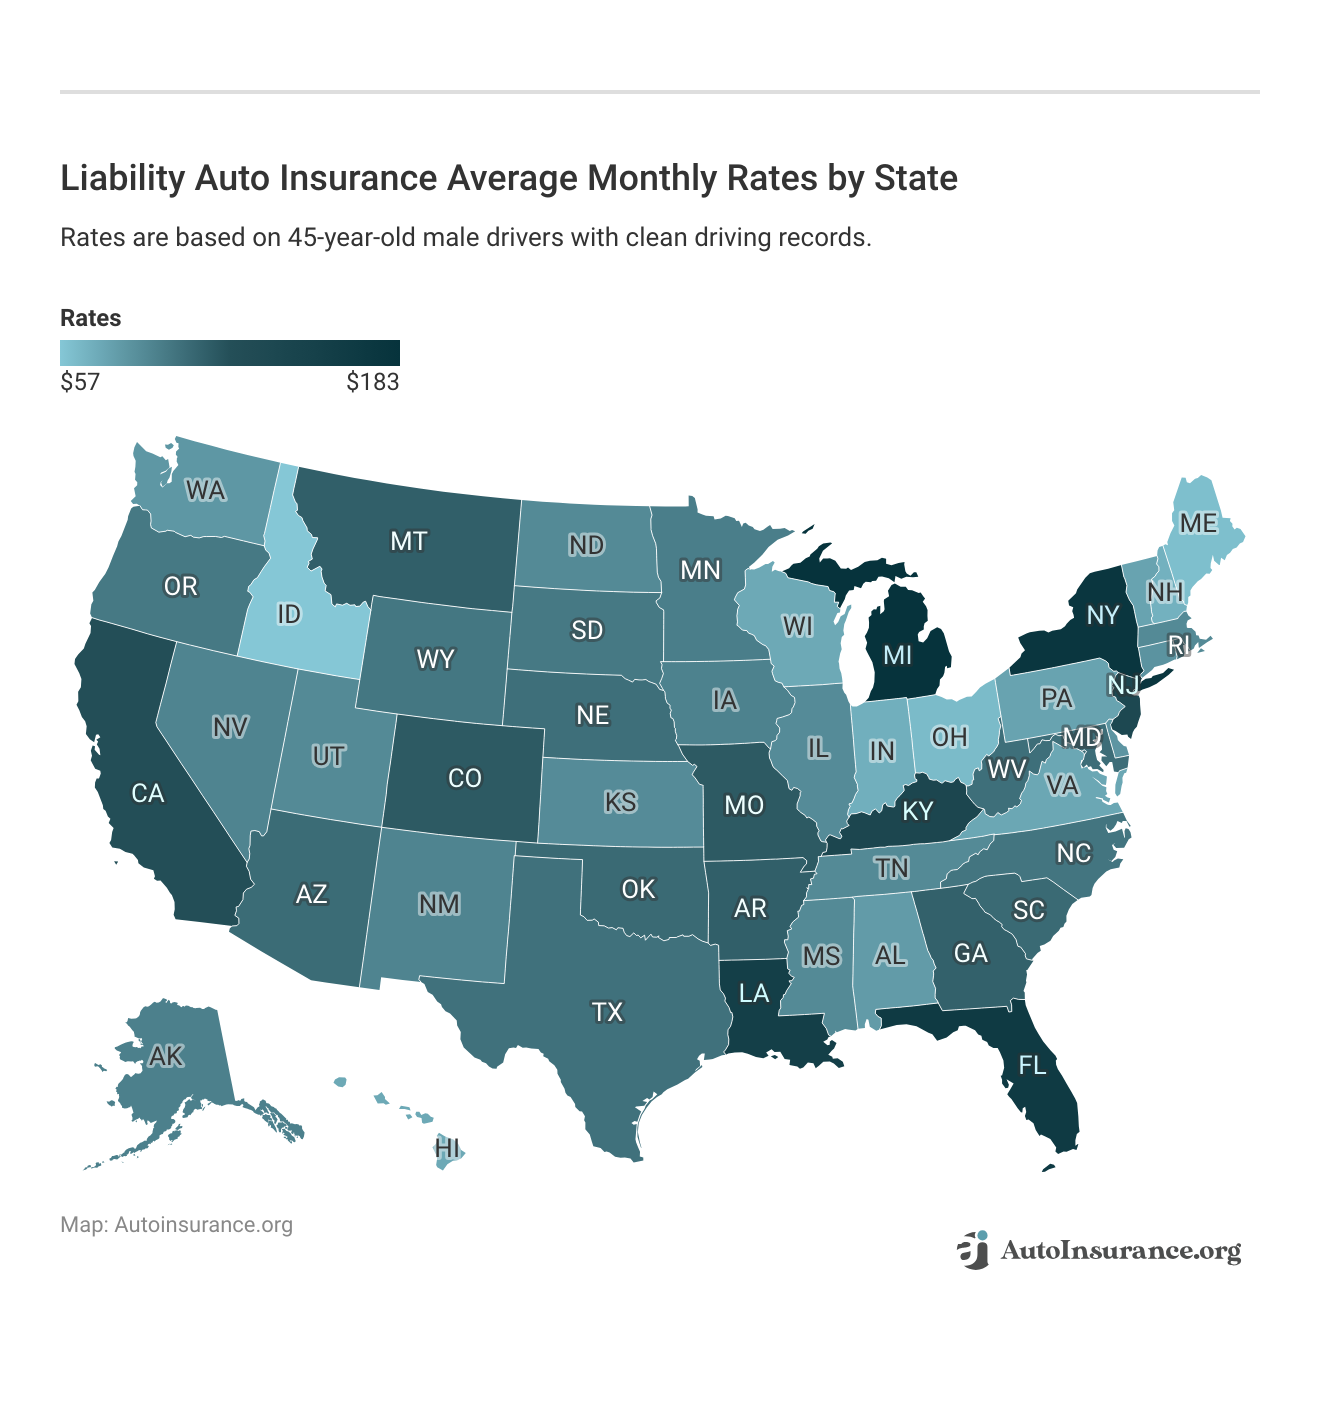 <h3>Liability Auto Insurance Average Monthly Rates by State</h3>